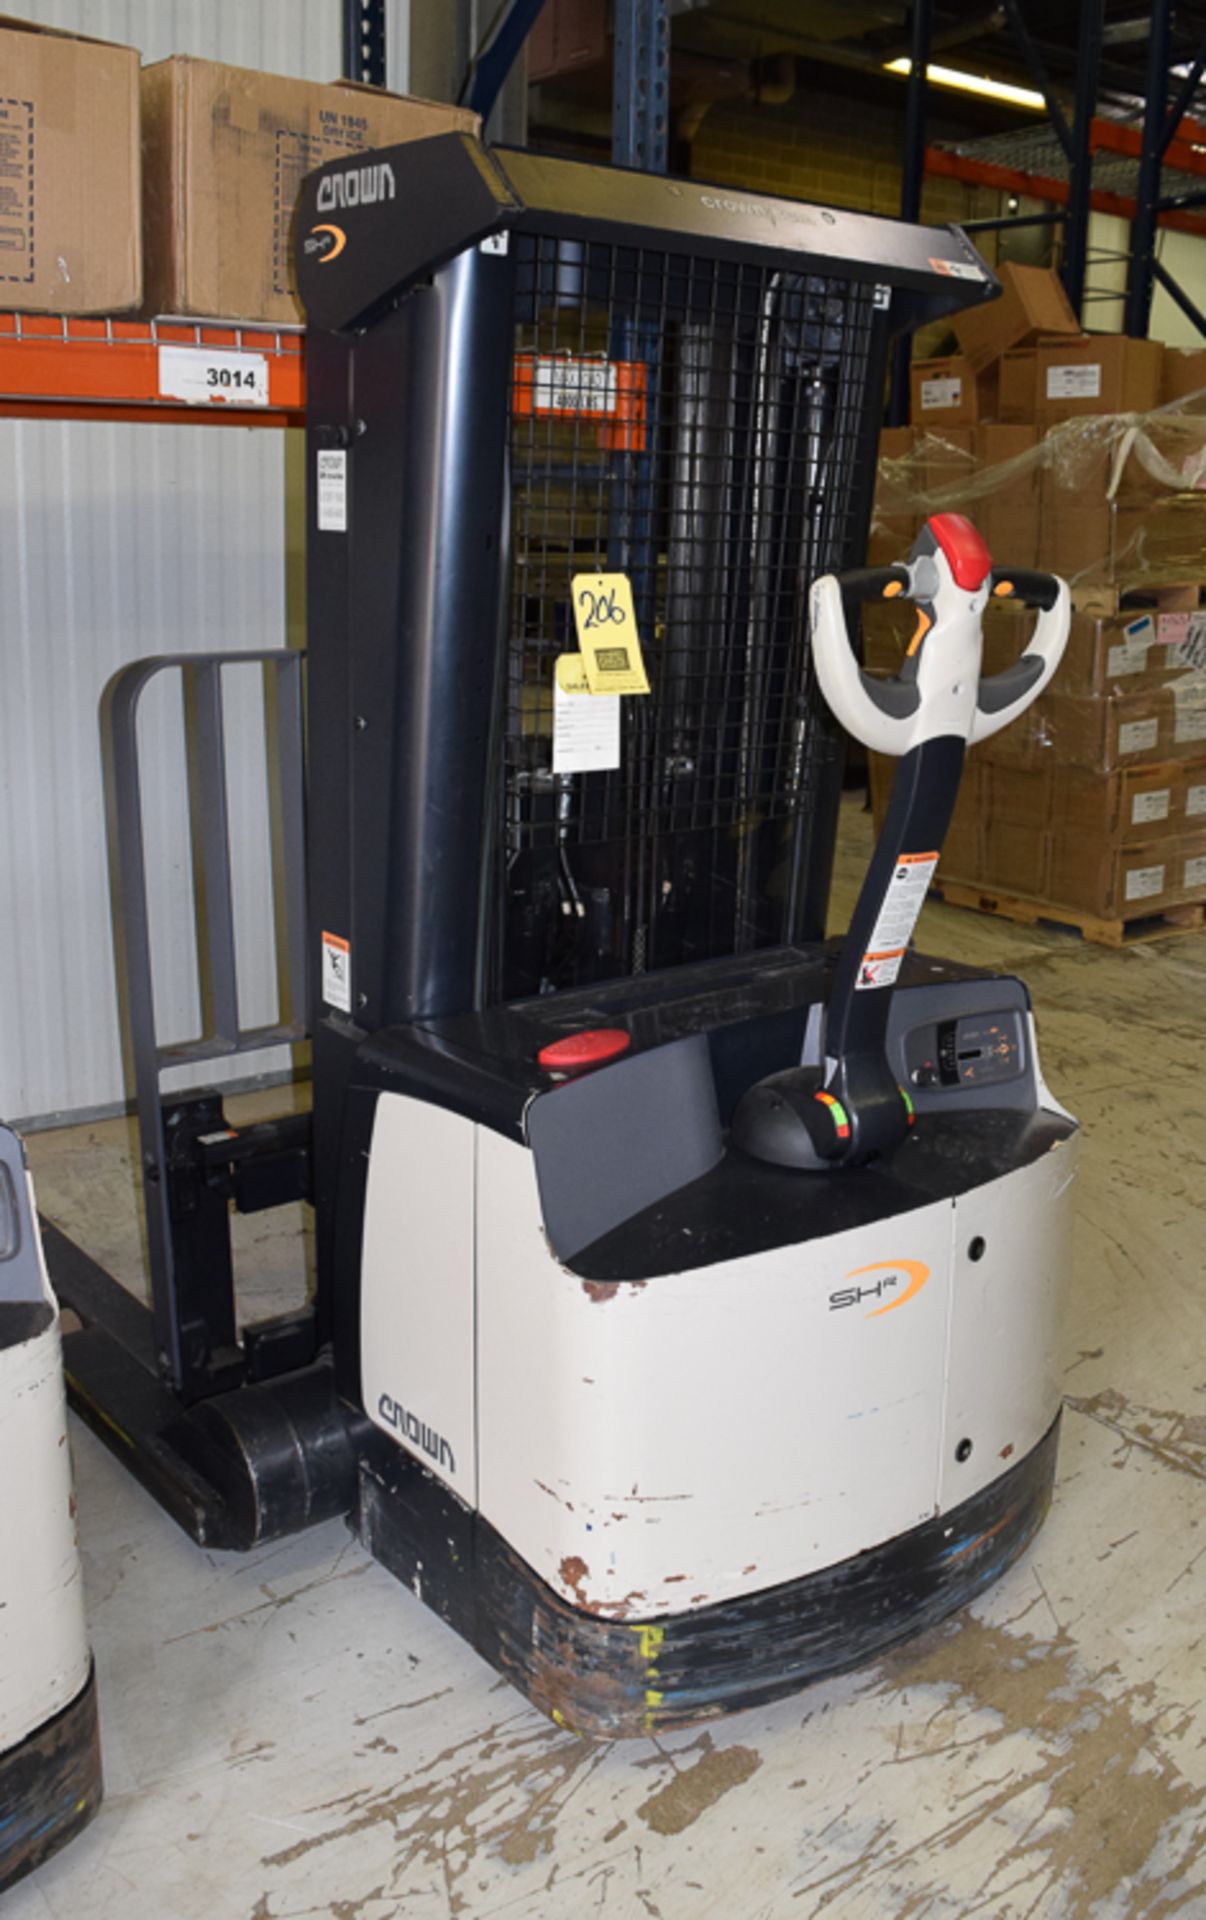 Crown 2,700 Pound Capacity Walk Behind Electric Fork Lift, Model: 5RH5520-30, SN: 6A326306, with